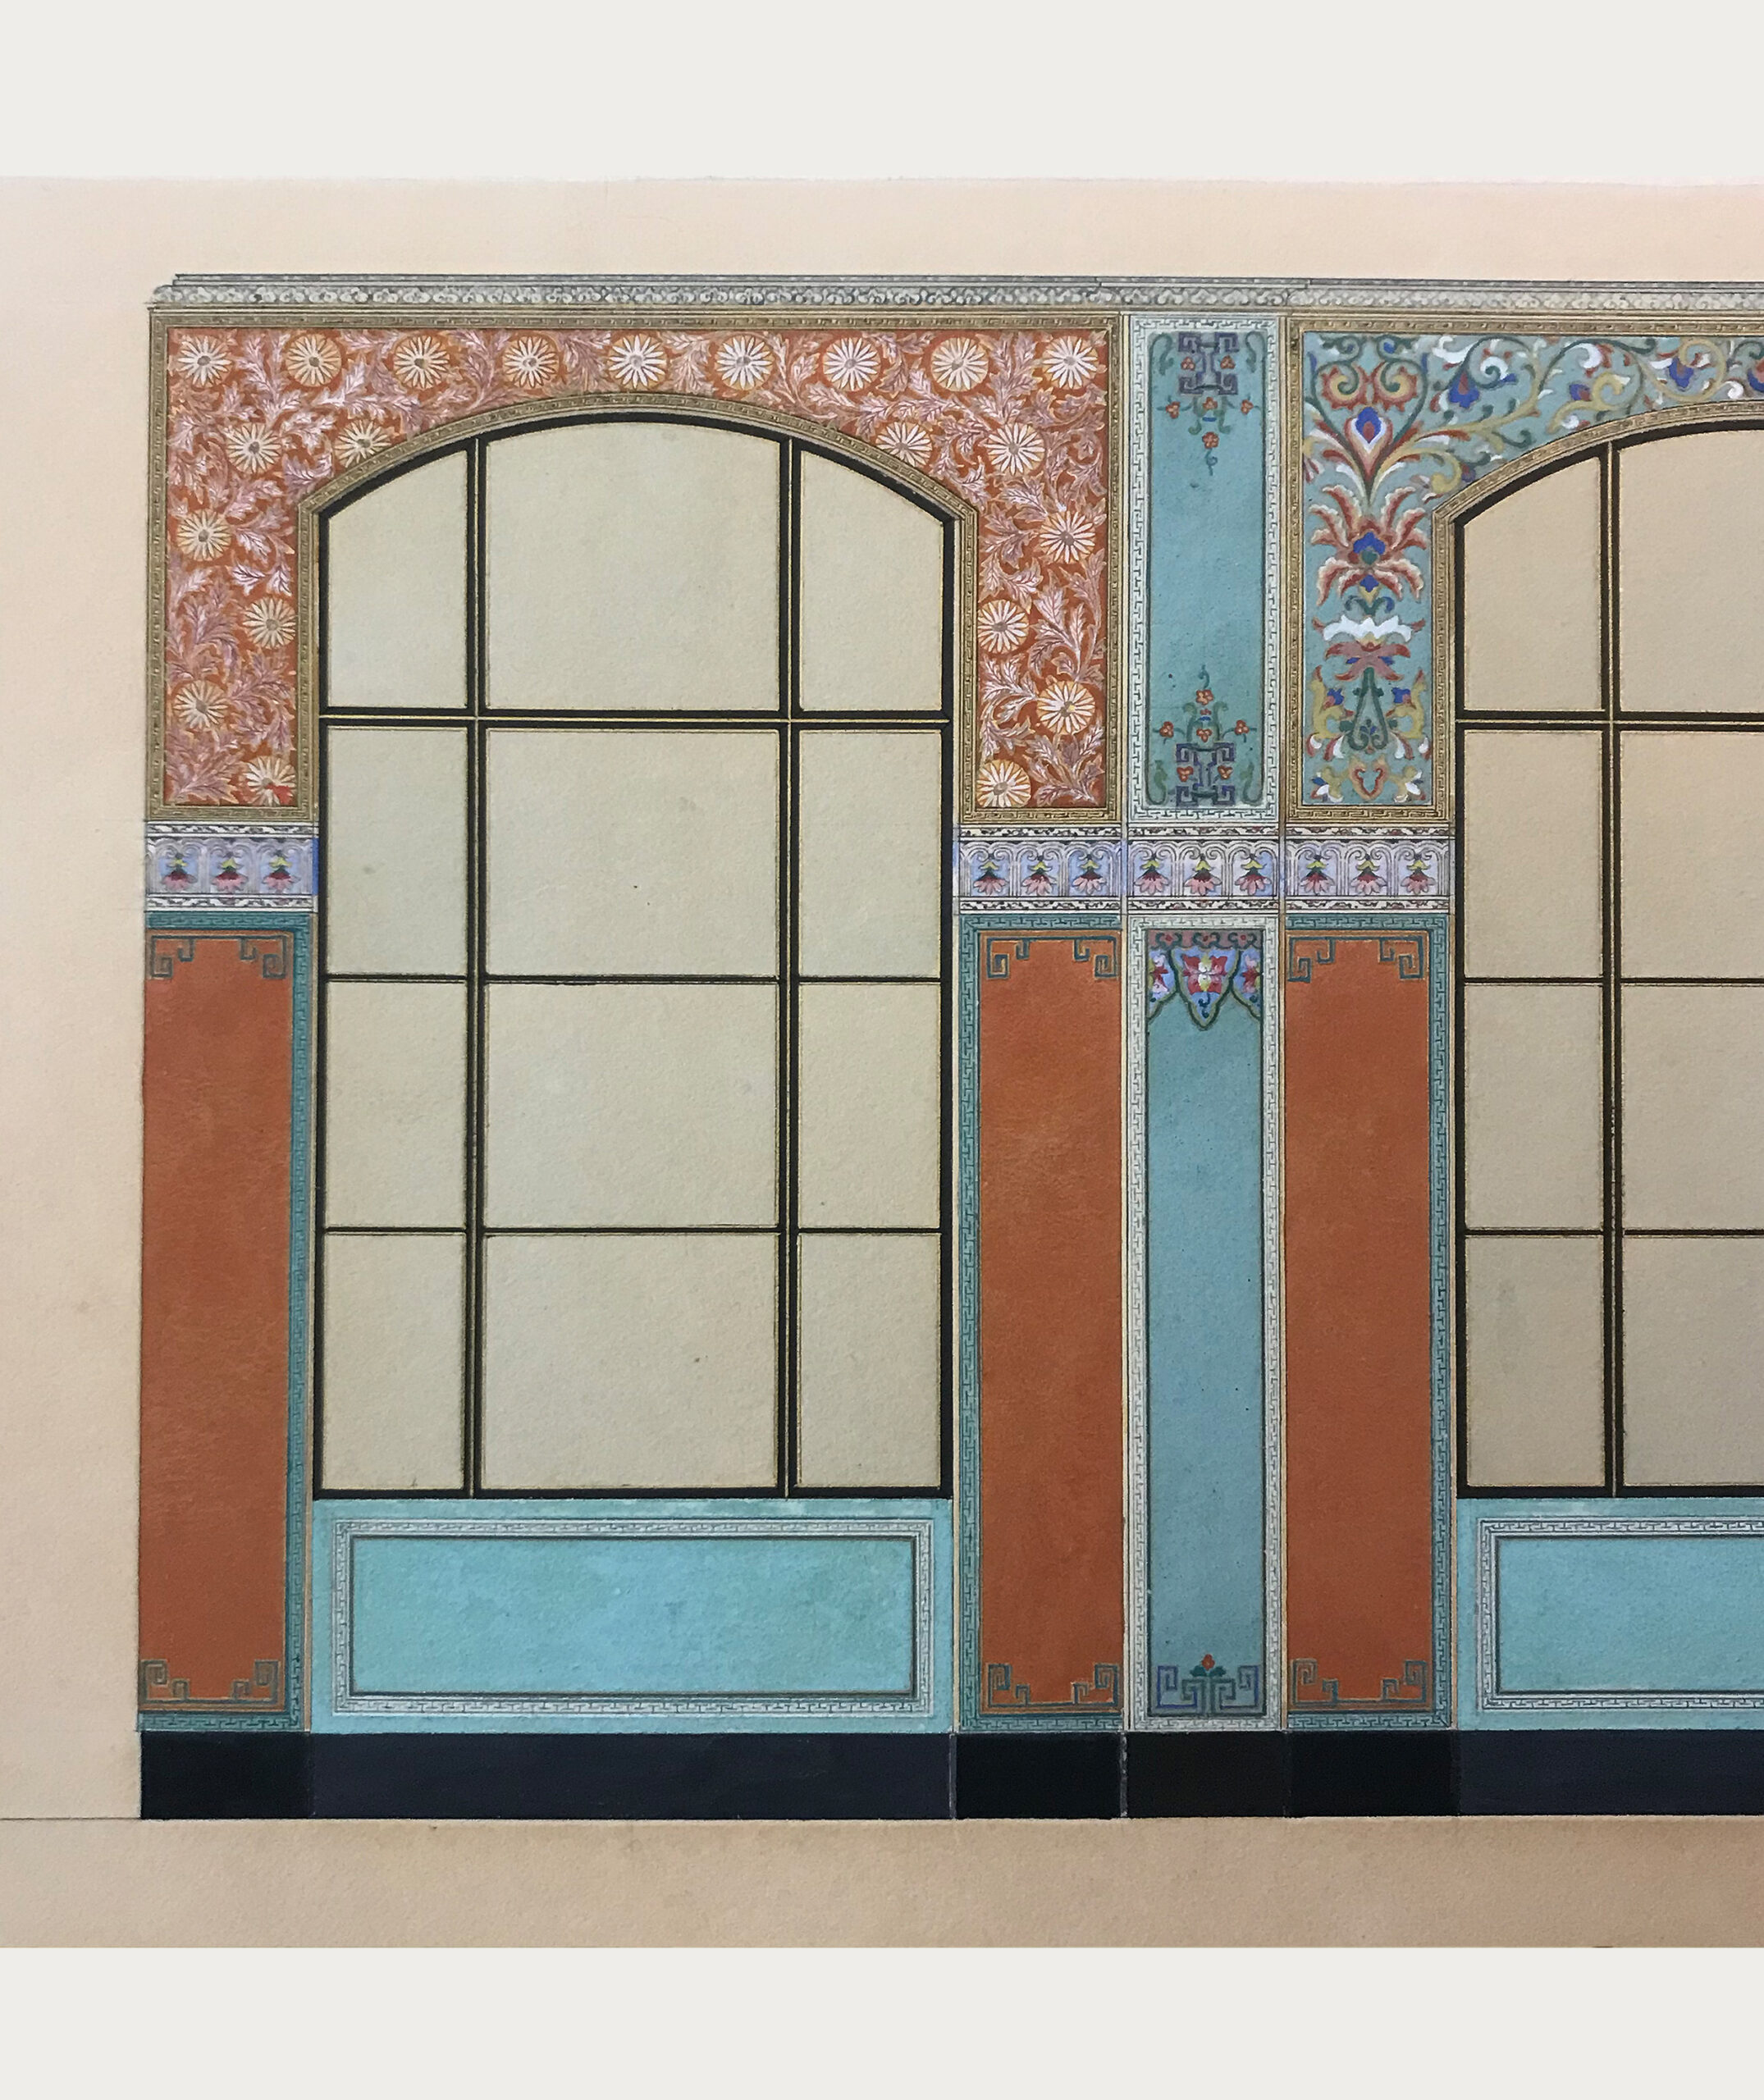 Image of a wide window architechure with bright orange ornate patterns on the walls.